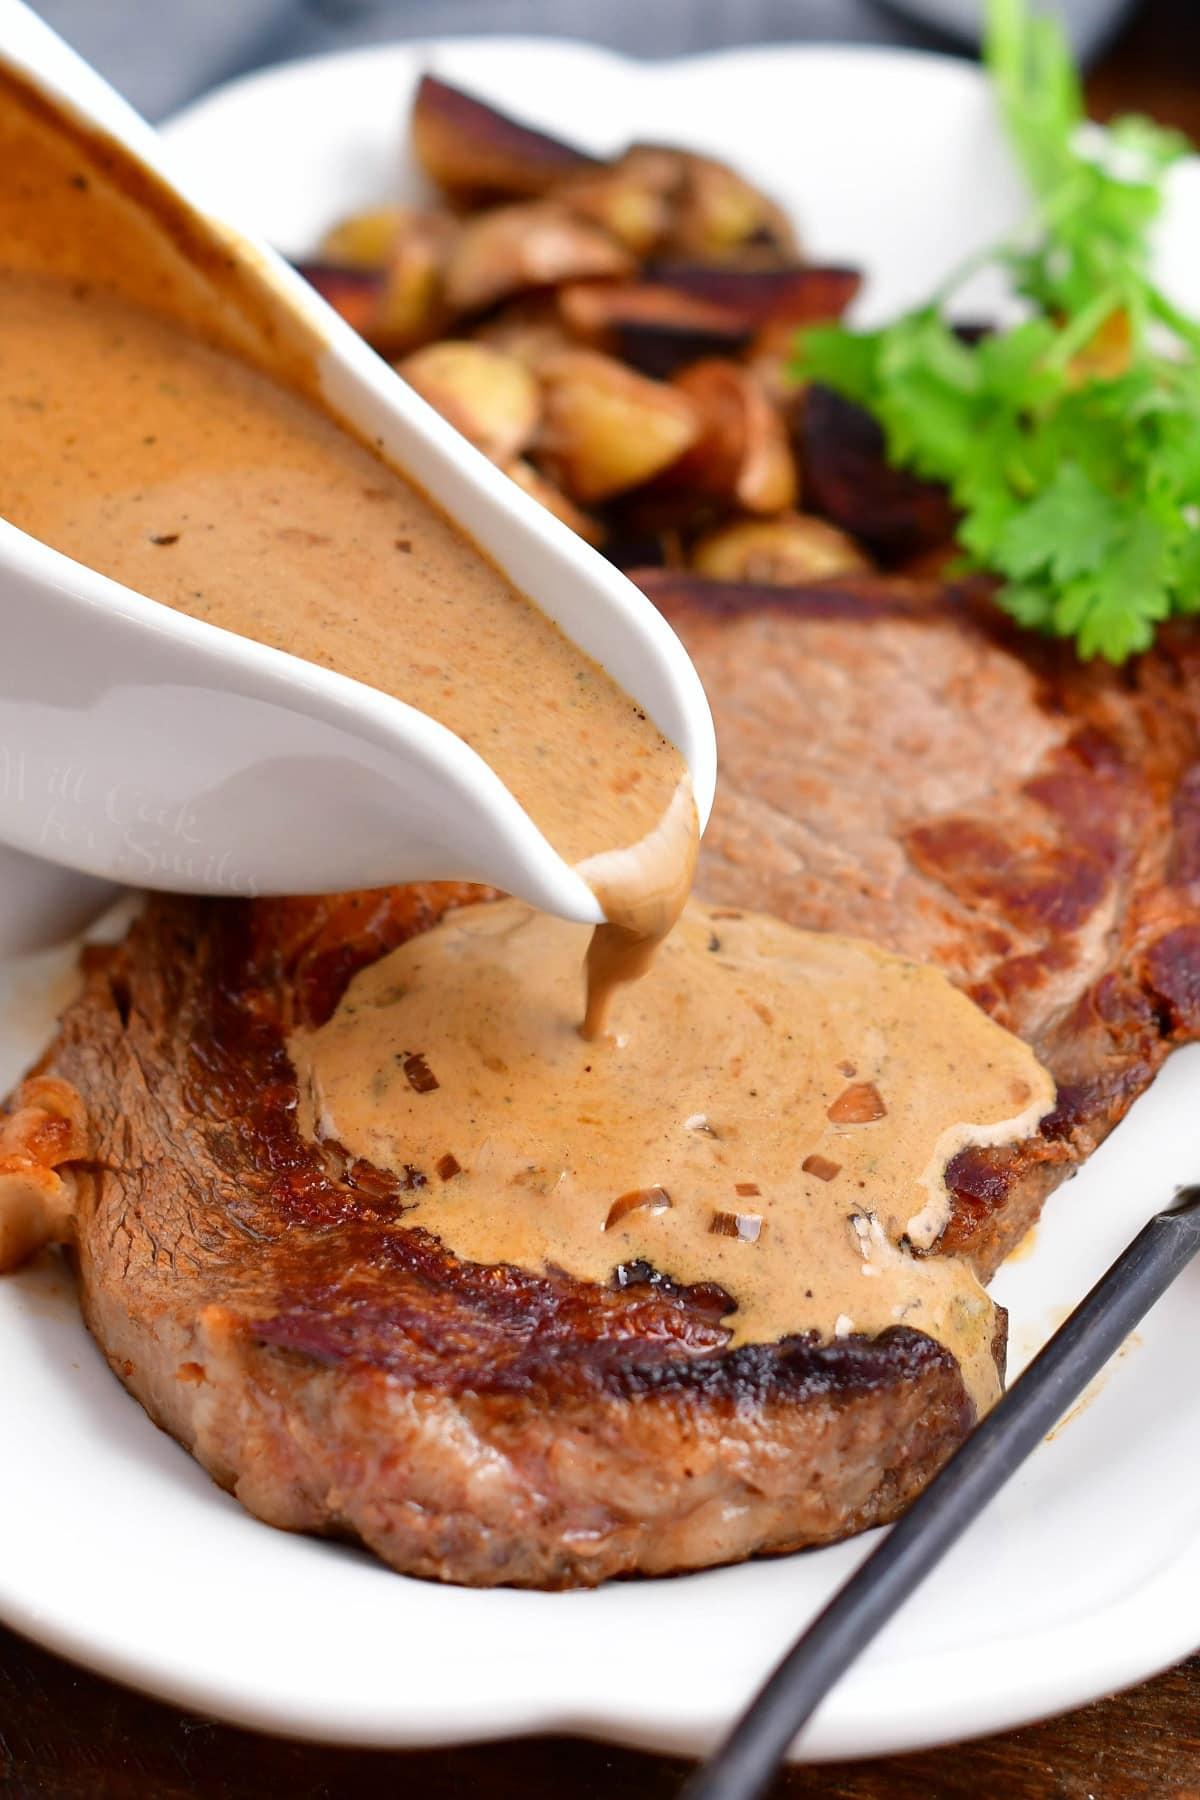 pepper sauce being poured over cooked steak on white platter